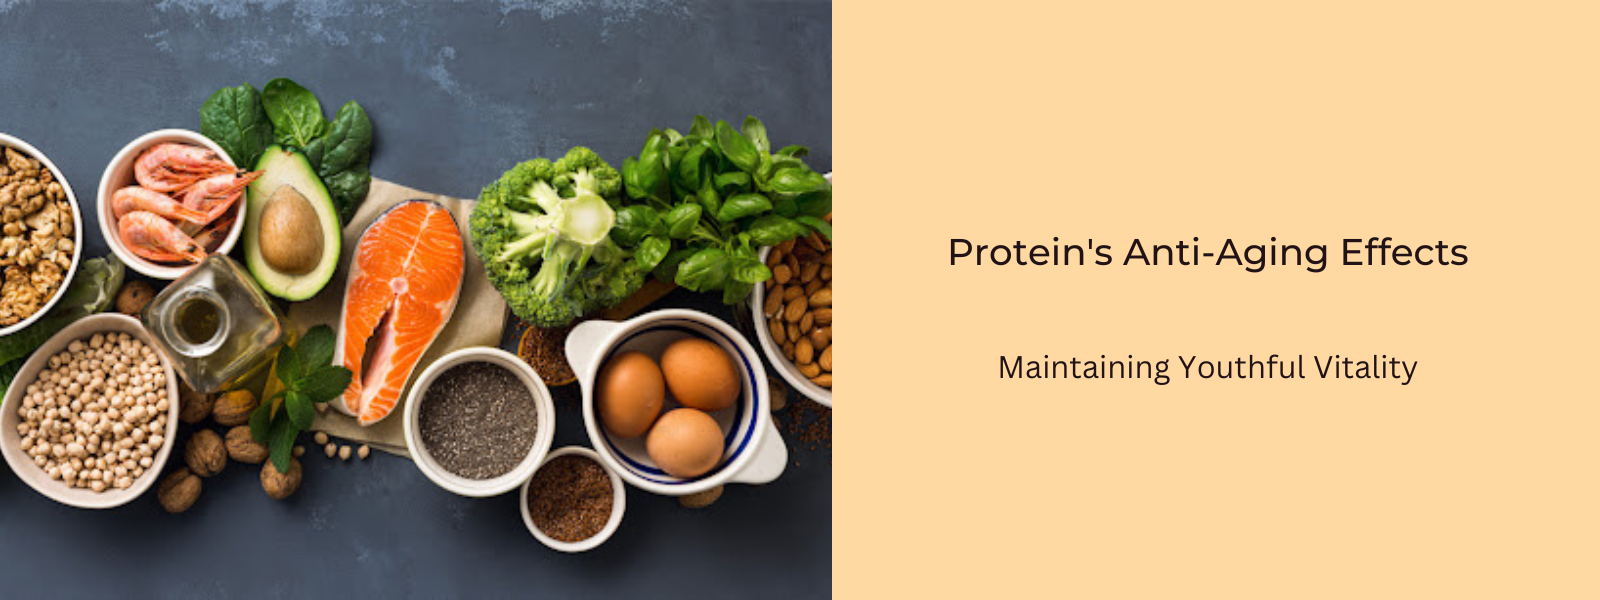 Protein's Anti-Aging Effects: Maintaining Youthful Vitality